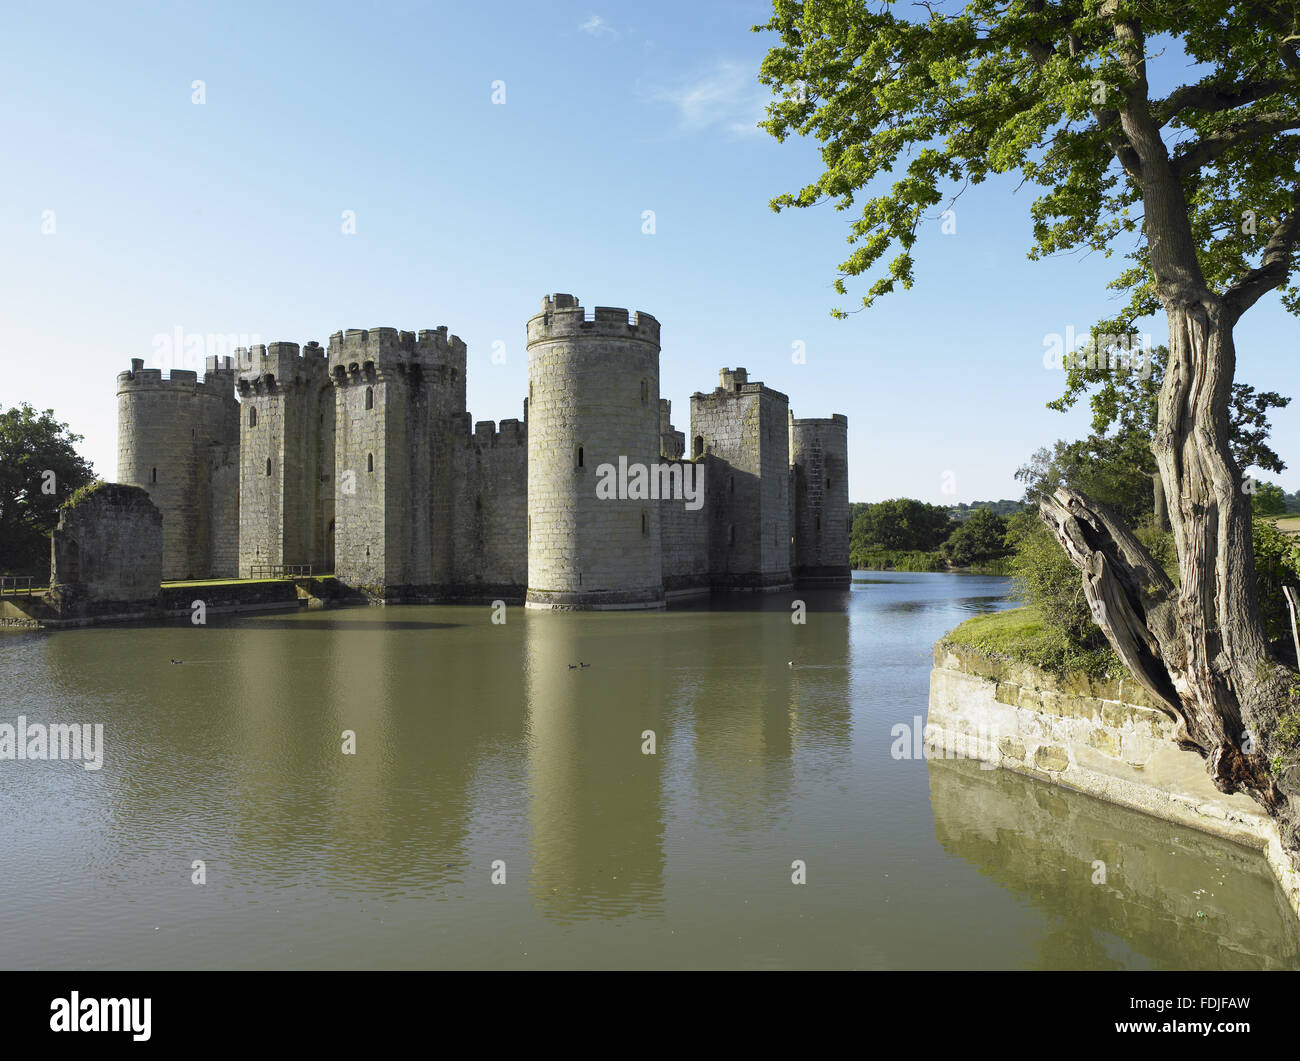 Bodiam Castle, East Sussex, built between 1385 and 1388. The castle replaced Sir Edward Dalyngrigge's manor house during the Hundred Years War when the French were able to attack across the Channel, and could reach Bodiam via the River Rother. Stock Photo